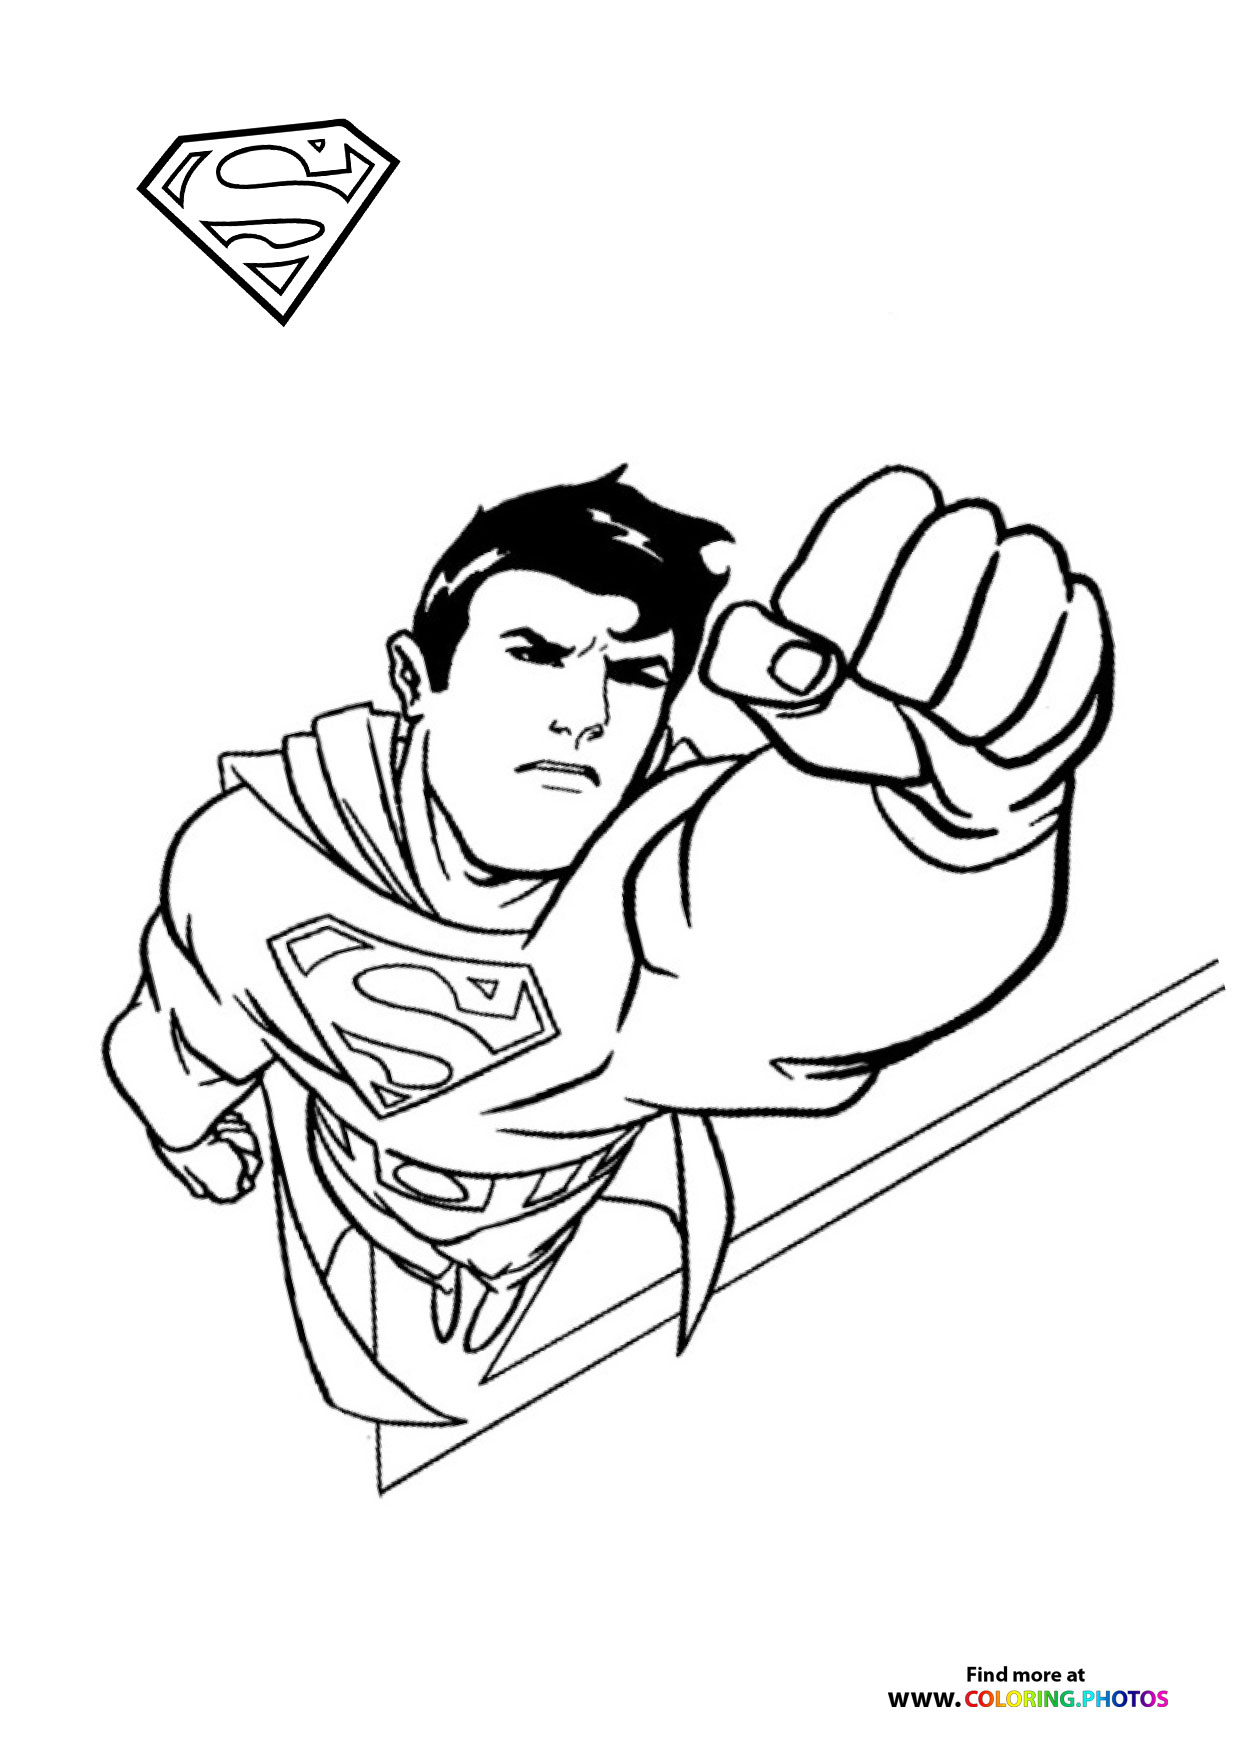 Superman page free and easy print or download sheets for kdis